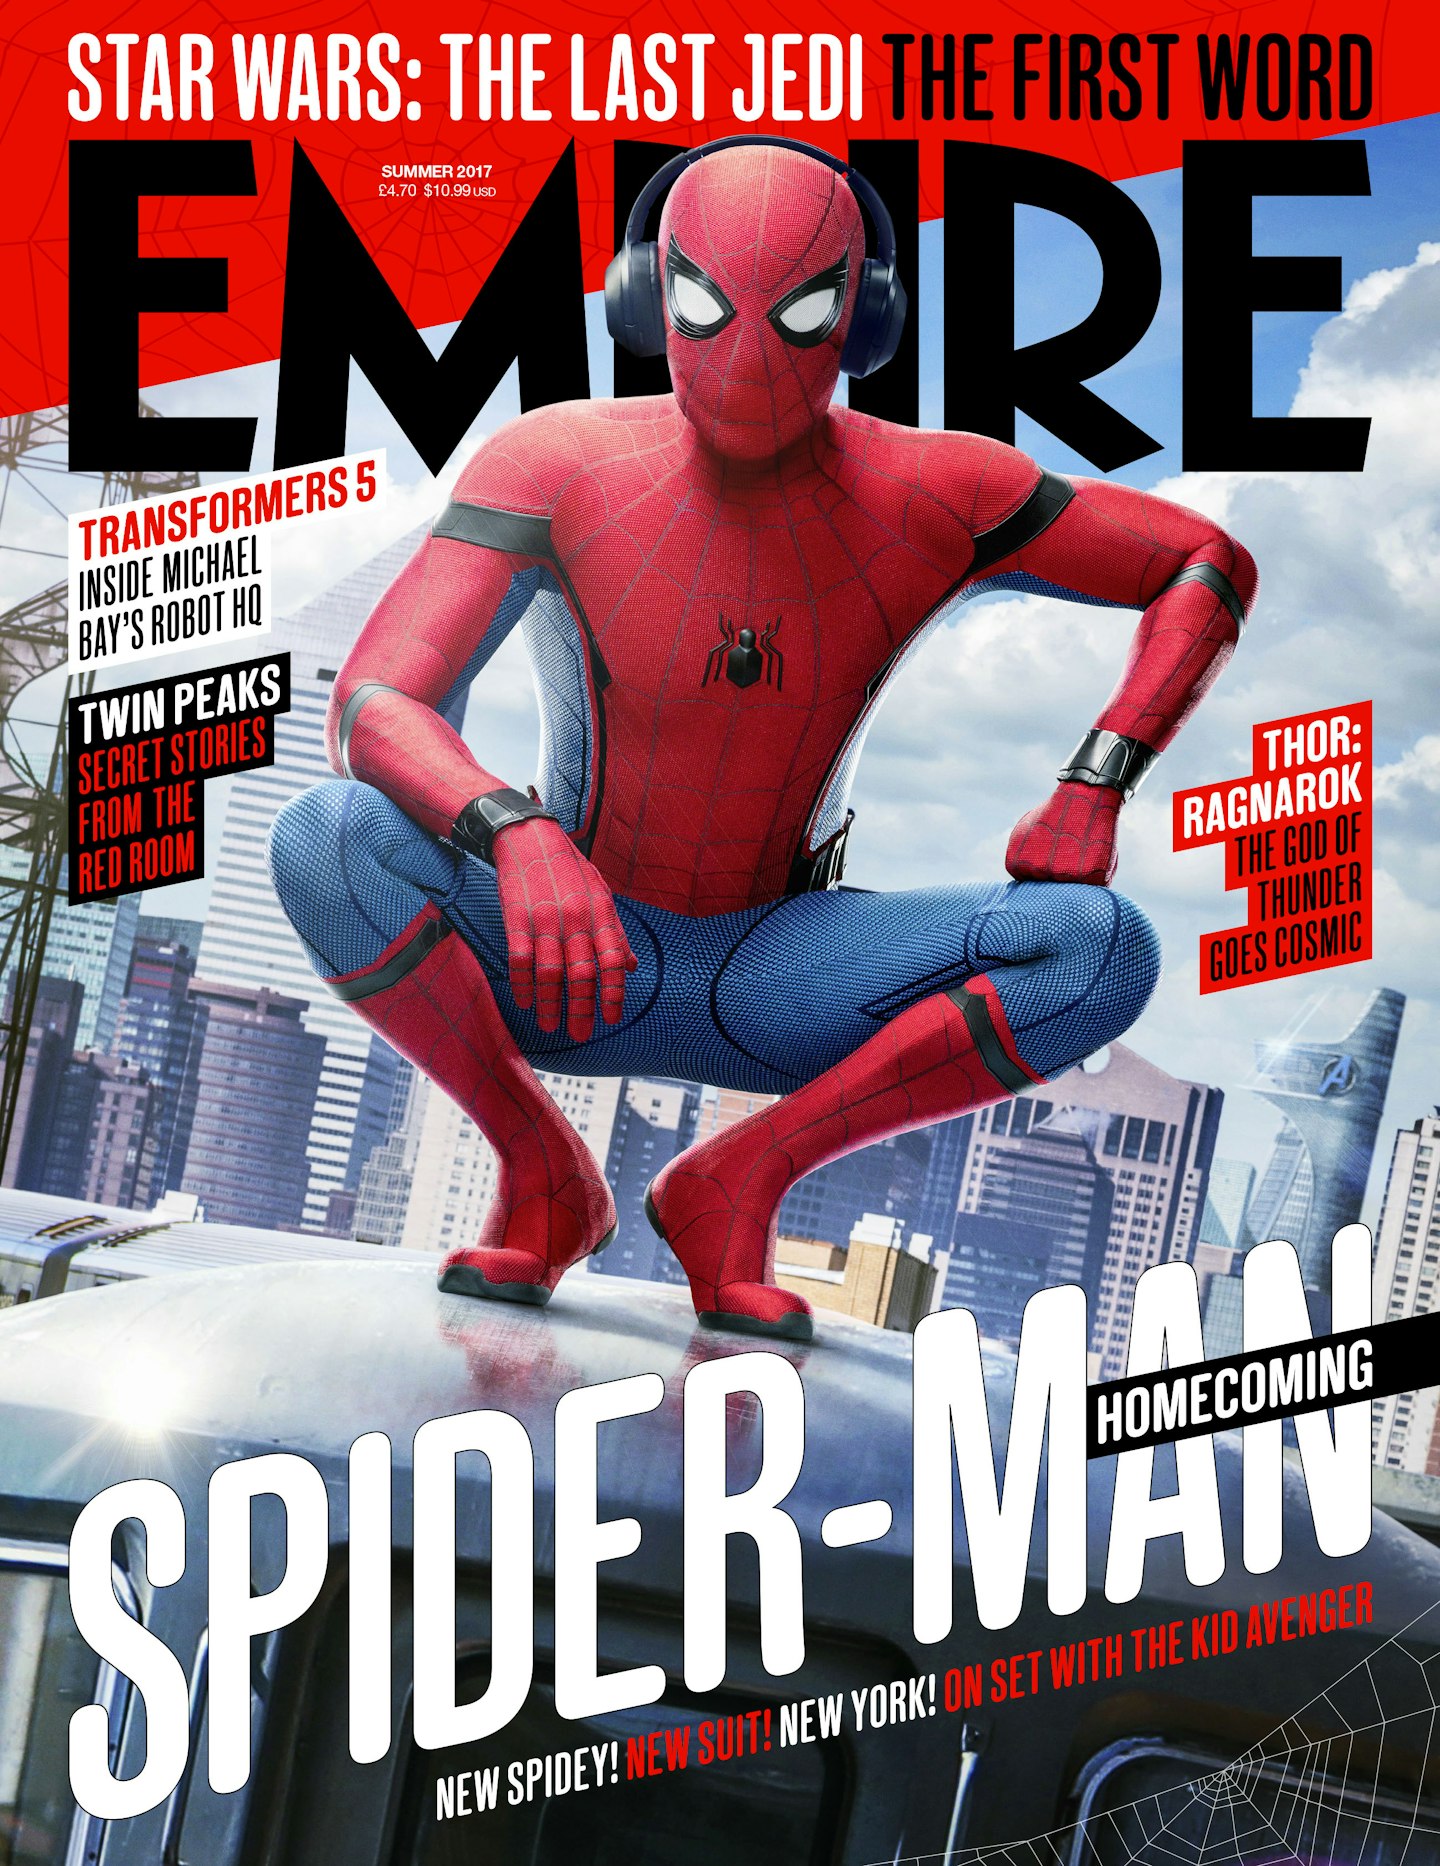 Empire's Exclusive Spider-Man: Homecoming Cover Revealed, Movies